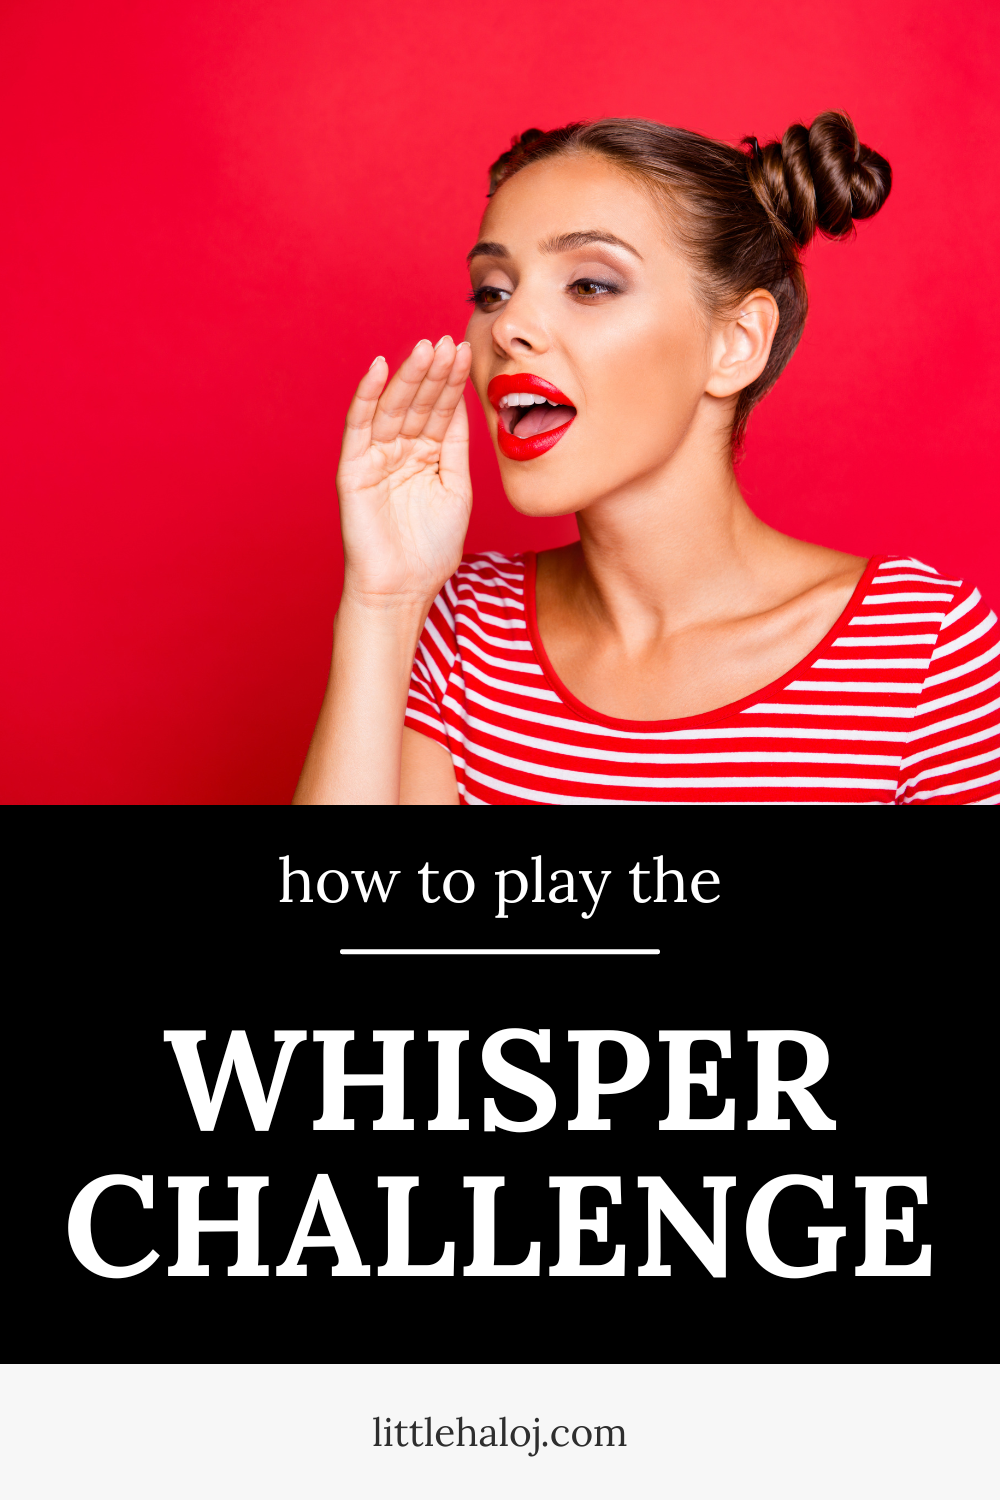 How to play the whisper challenge game